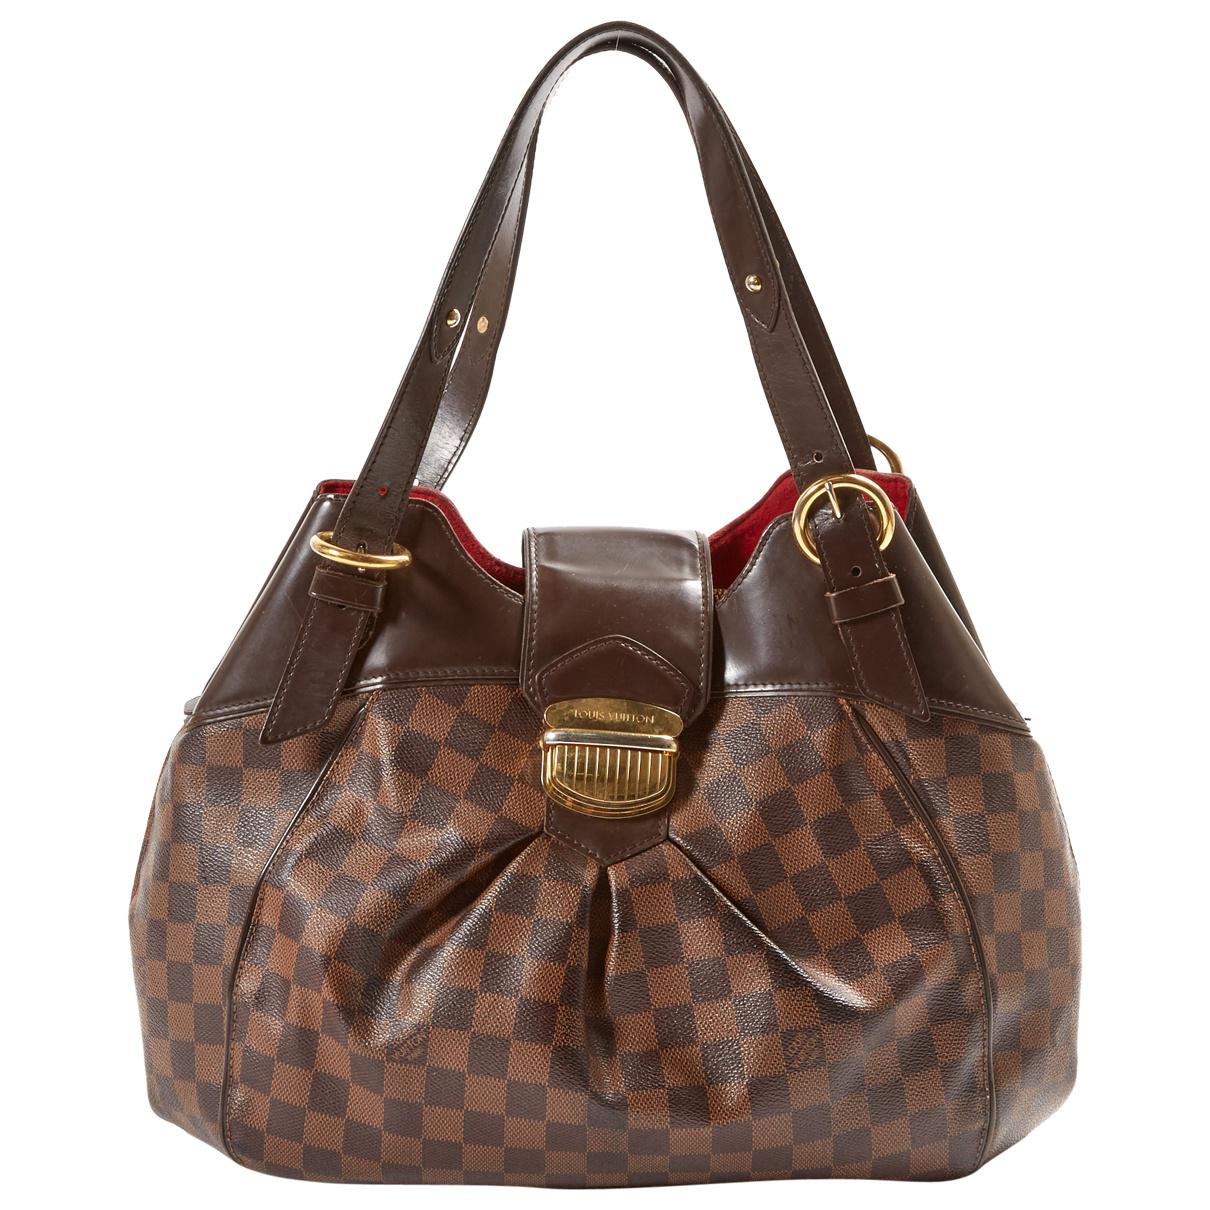 Lyst - Louis Vuitton Pre-owned Brown Leather Handbags in Brown